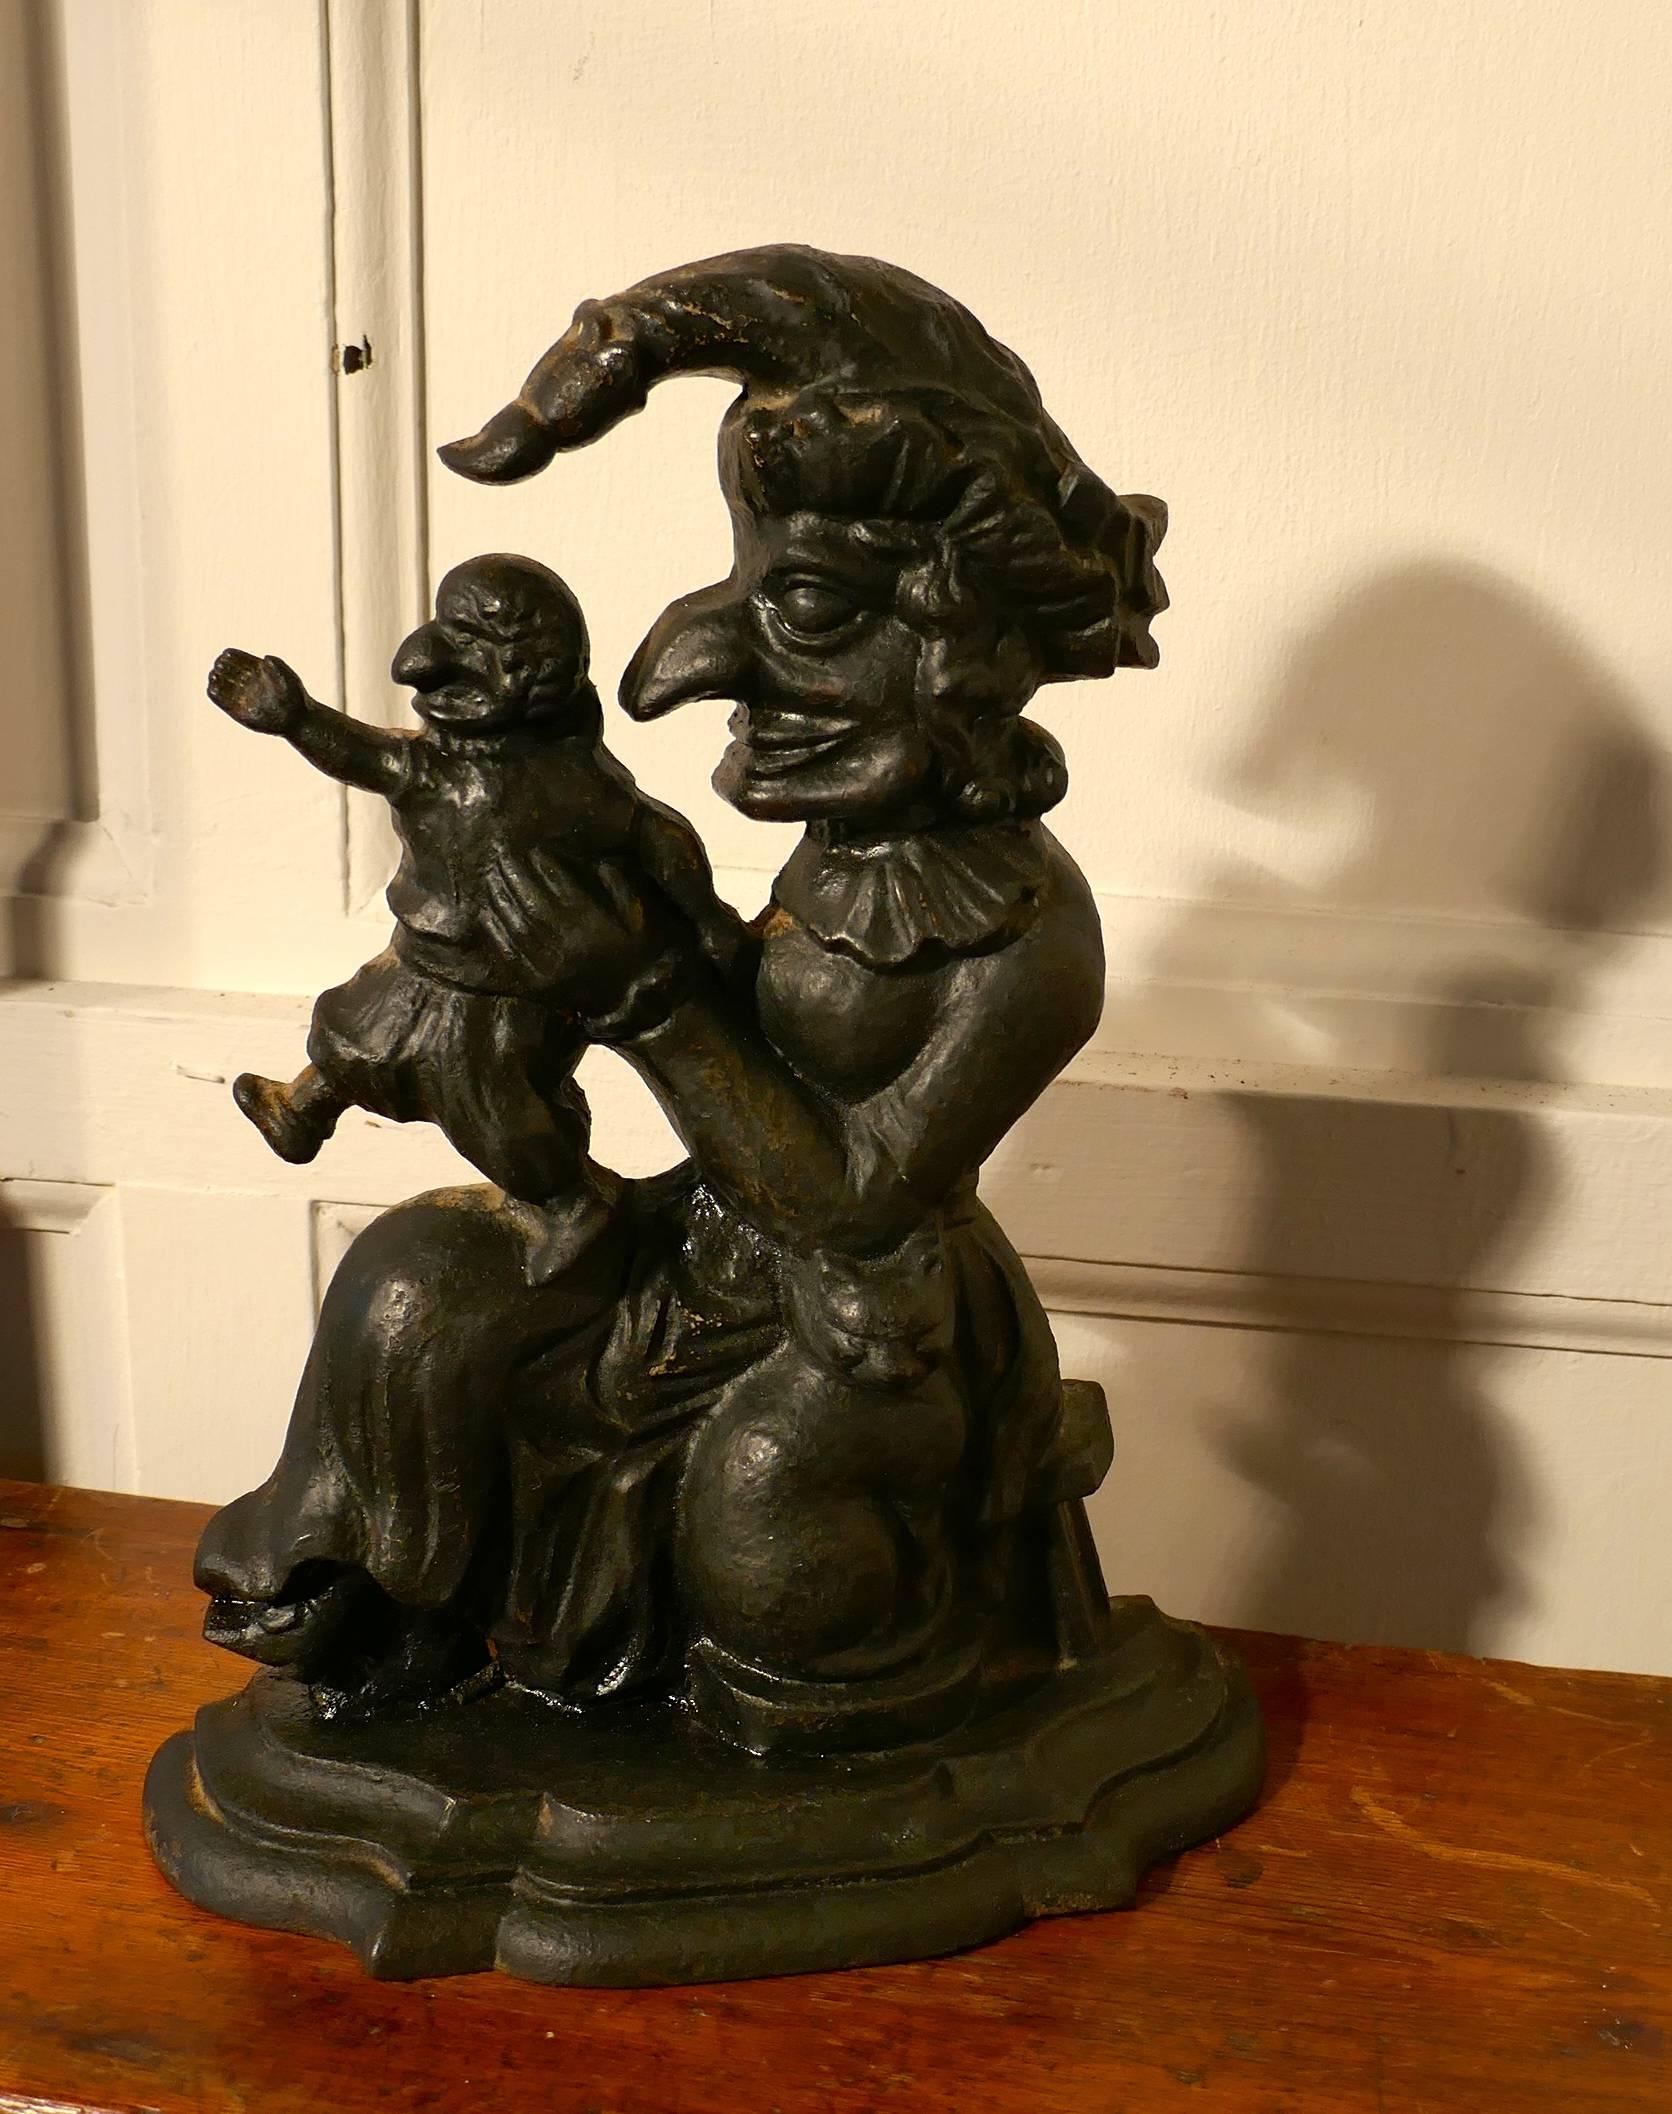 Very rare early 19th century cast iron Judy door stop

This is a very rare piece, we have Judy holding a very angry looking baby Punch
This is an original early 19th century piece and very different from the better known late 19th century